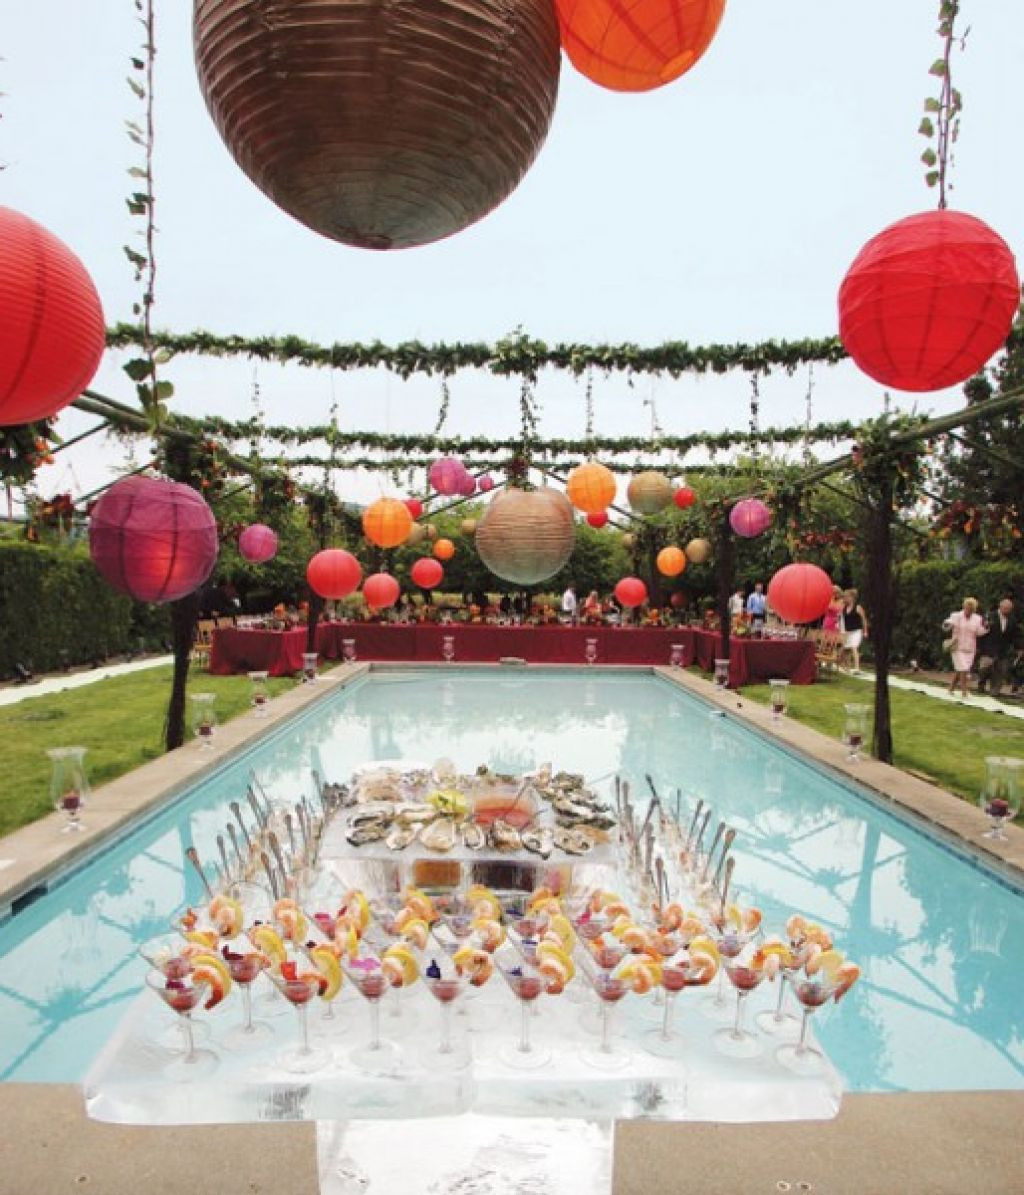 Ideas For Pool Party Decorations
 Wedding Reception Pool Party Decorating Ideas – New